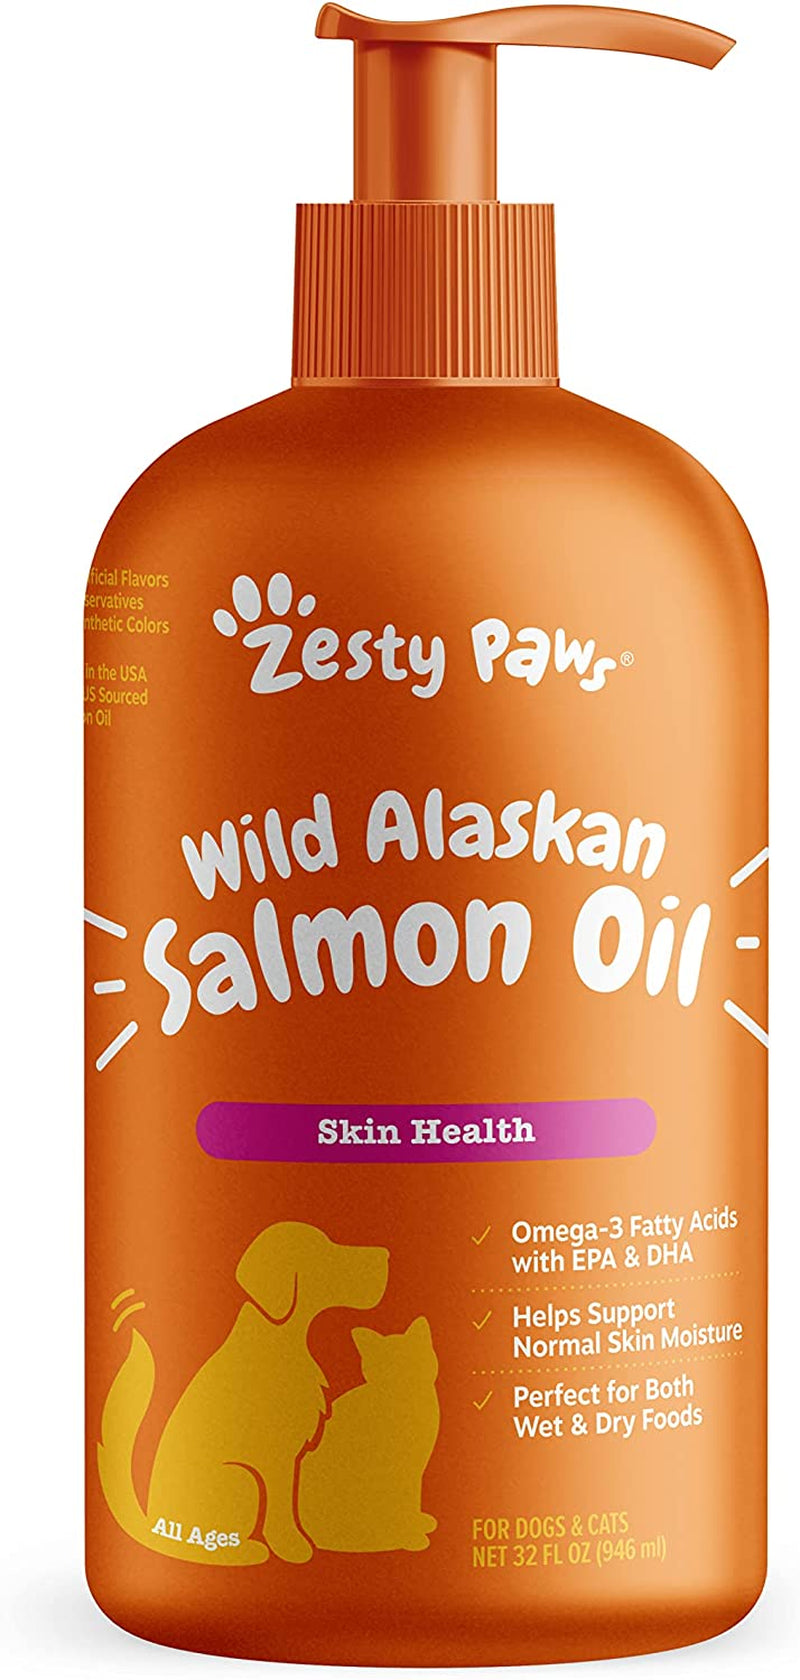 Pure Wild Alaskan Salmon Oil for Dogs & Cats - Omega 3 Skin & Coat Support - Liquid Food Supplement for Pets - Natural EPA + DHA Fatty Acids for Joint Function, Immune & Heart Health